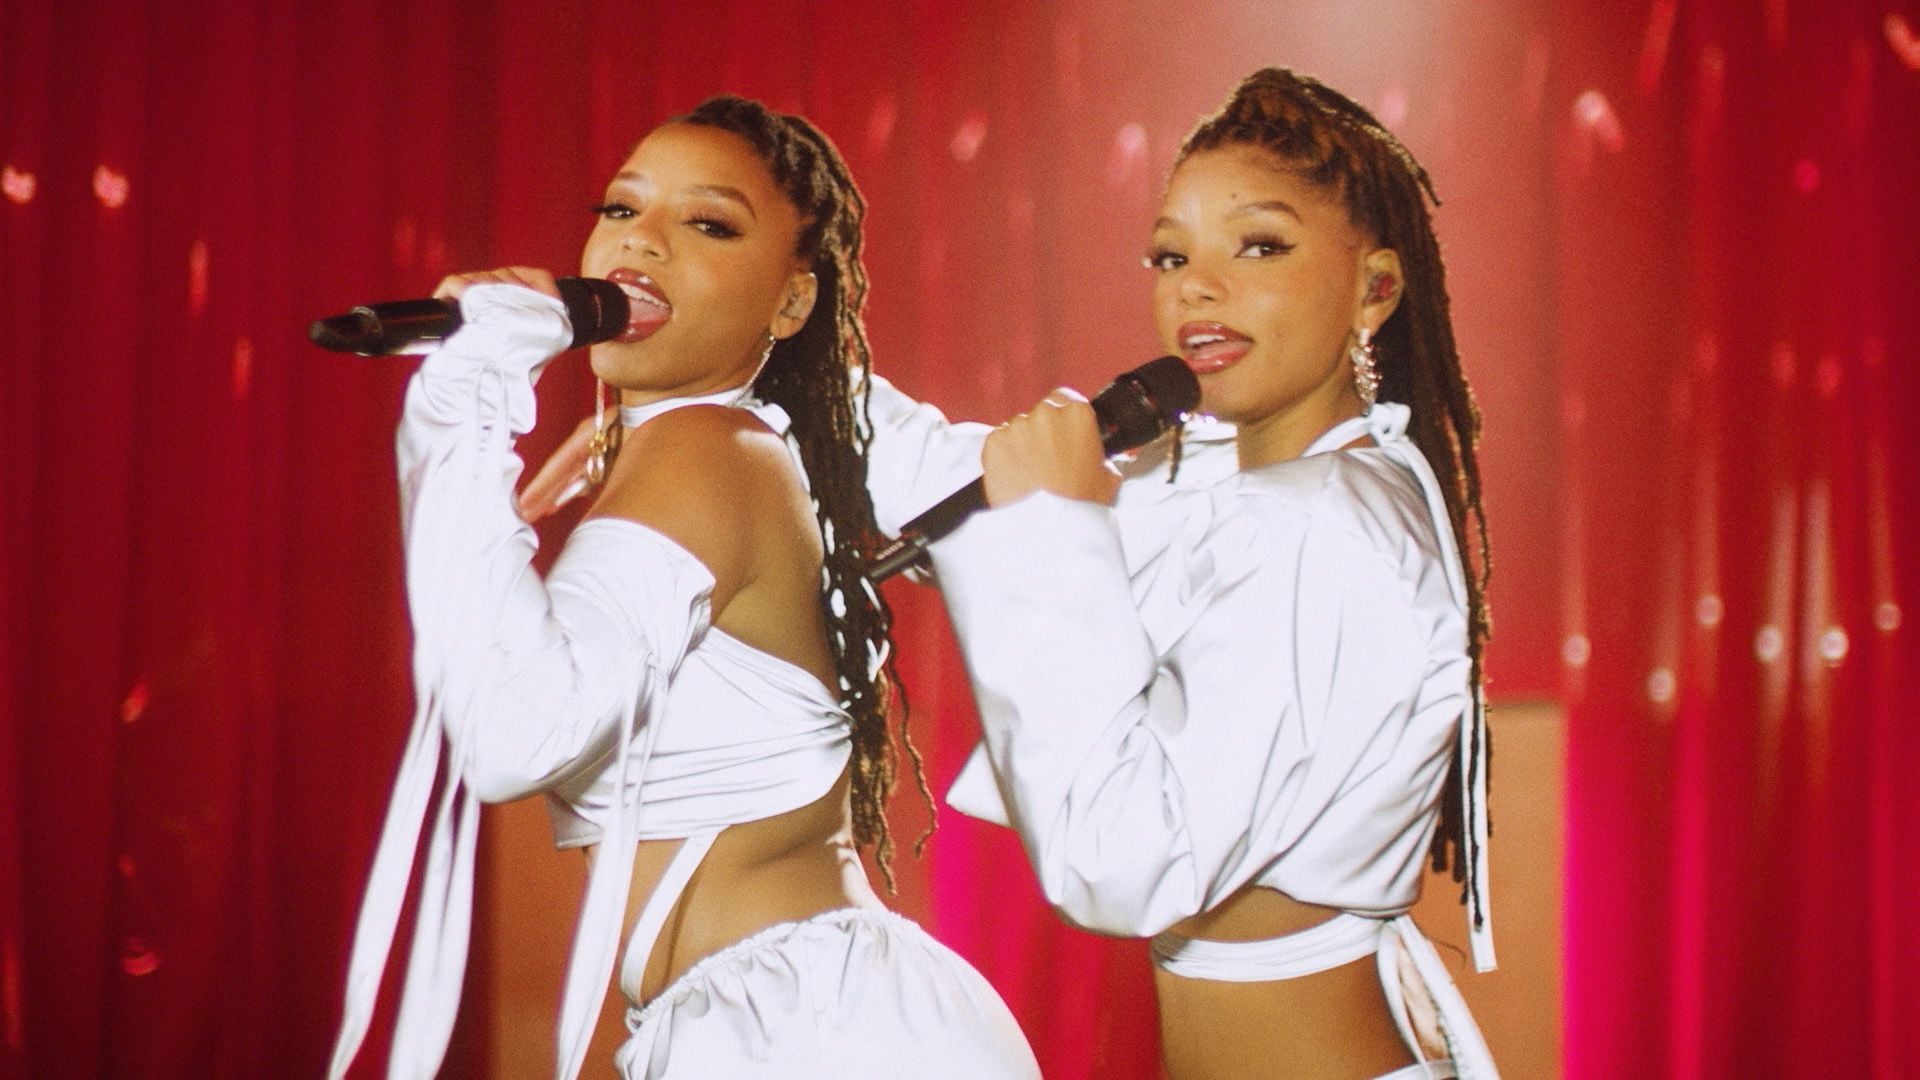 VARIOUS CITIES - JUNE 28: In this screengrab, Chloe x Halle perform during the 2020 BET Awards. The 20th annual BET Awards, which aired June 28, 2020, was held virtually due to restrictions to slow the spread of COVID-19. (Photo by BET Awards 2020/Getty Images via Getty Images)